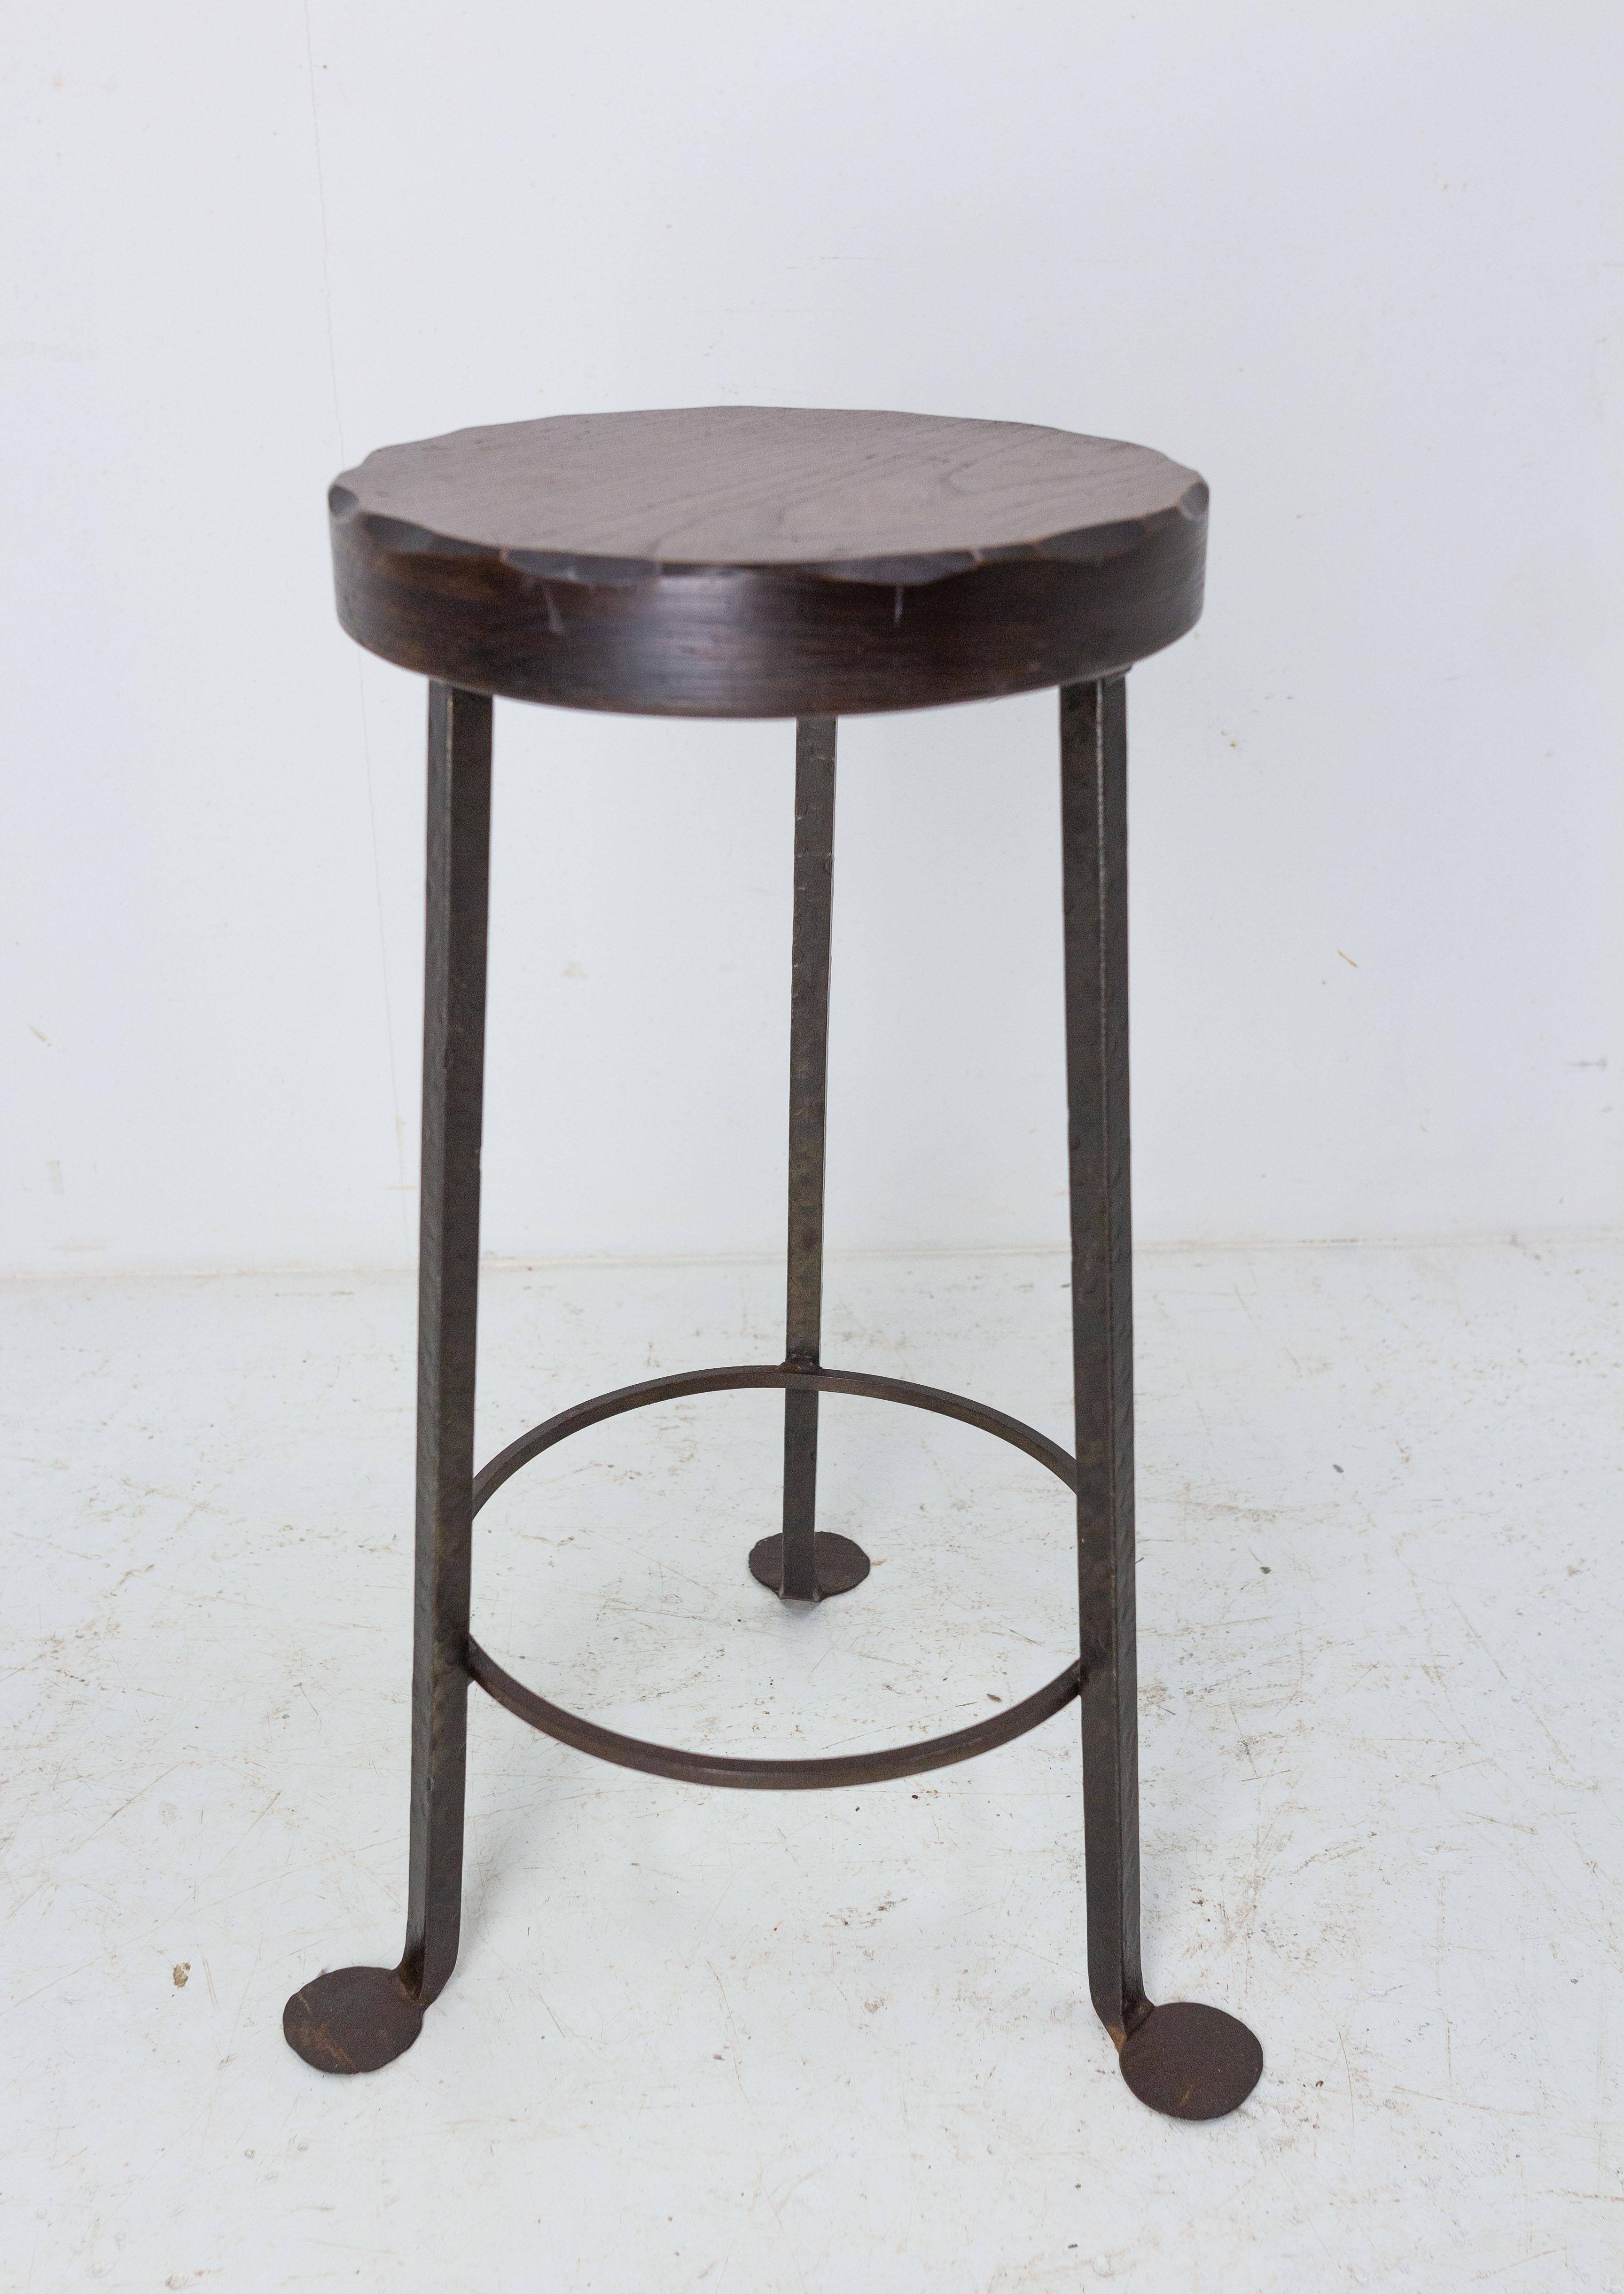 High wrought iron stool elm top breakfast bar stool French mid-century.
This can also be used as a plant holder.
Good condition solid and sturdy with minor signs of age.

Shipping:
L39 P32 H60,5 6,3 kg
